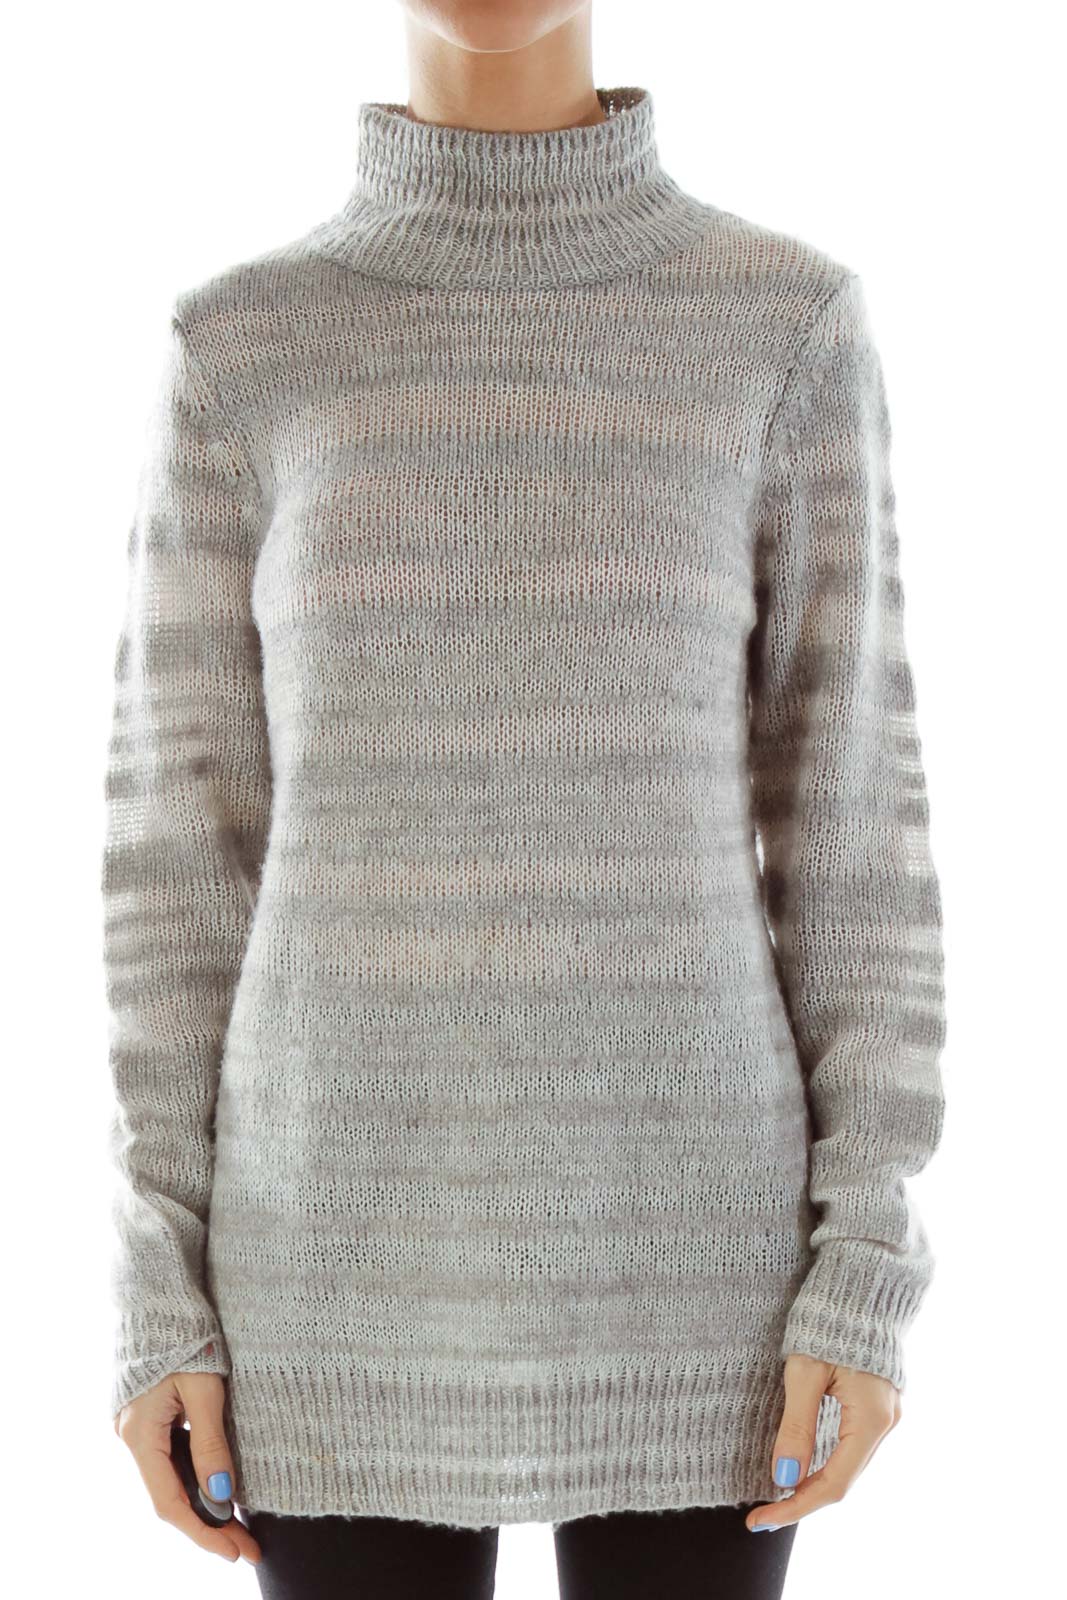 Gray Striped Turtleneck Sweater Front